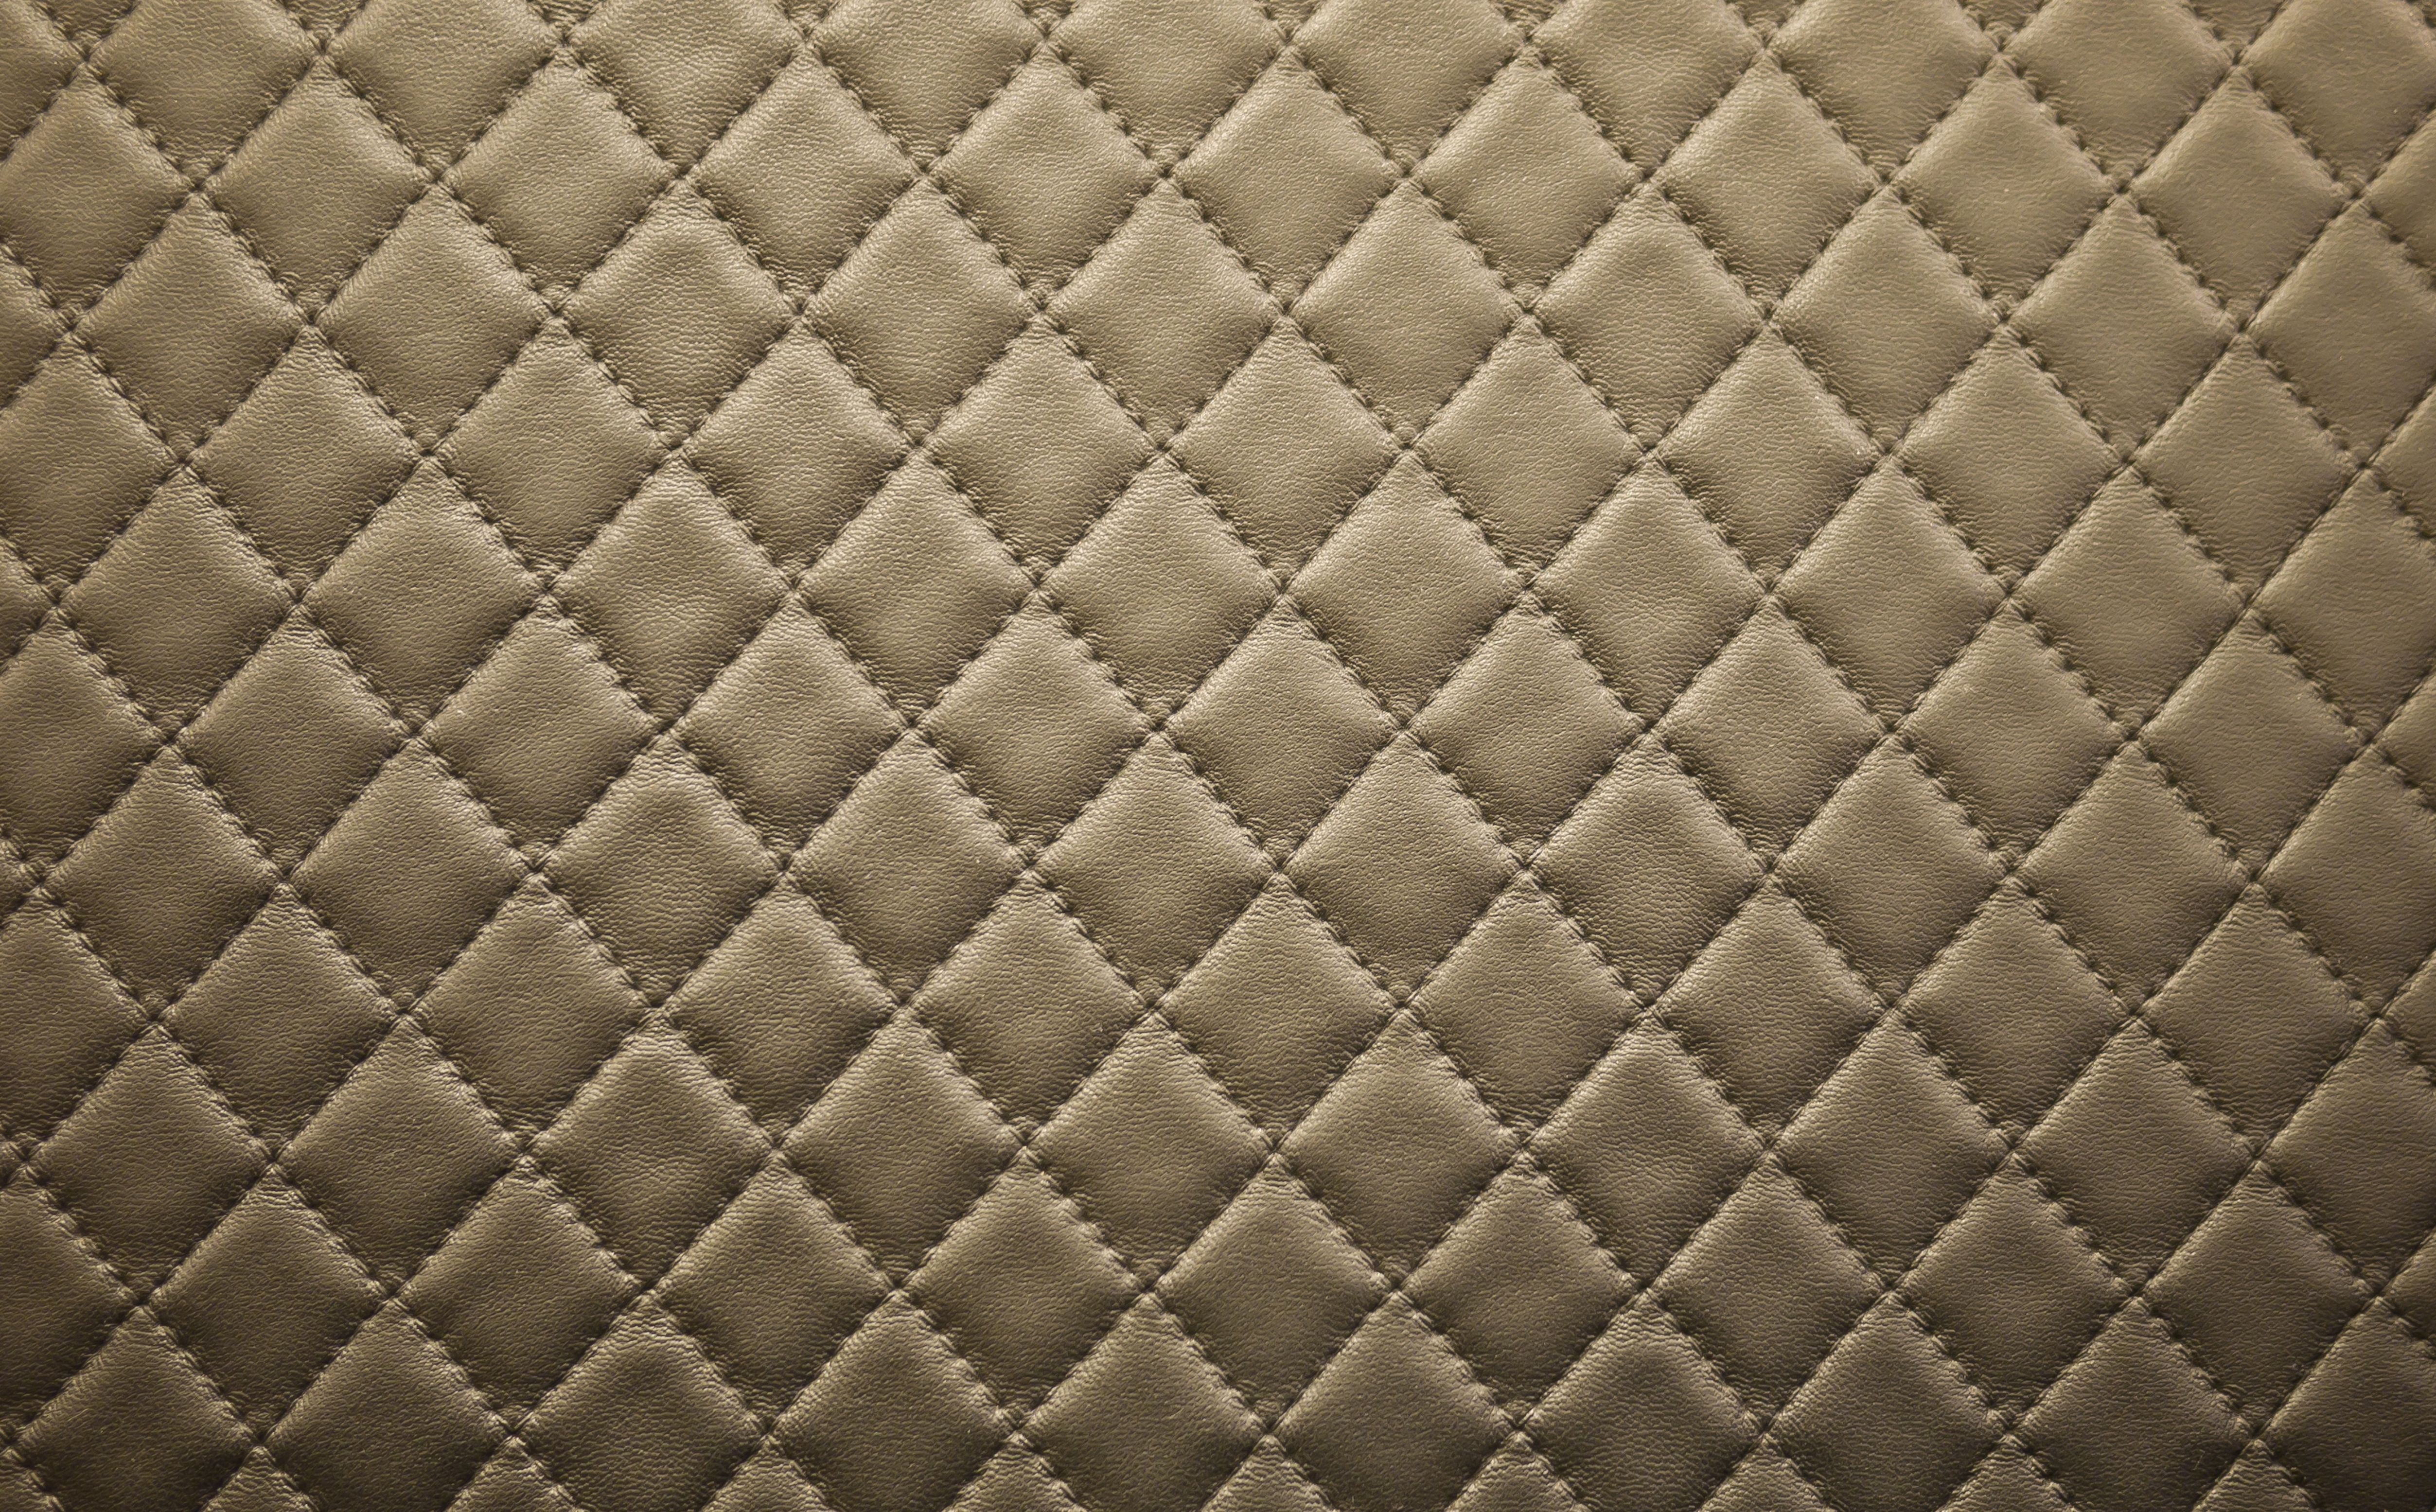 Leather Background Texture Quilted Piercing Thread Wallpaper